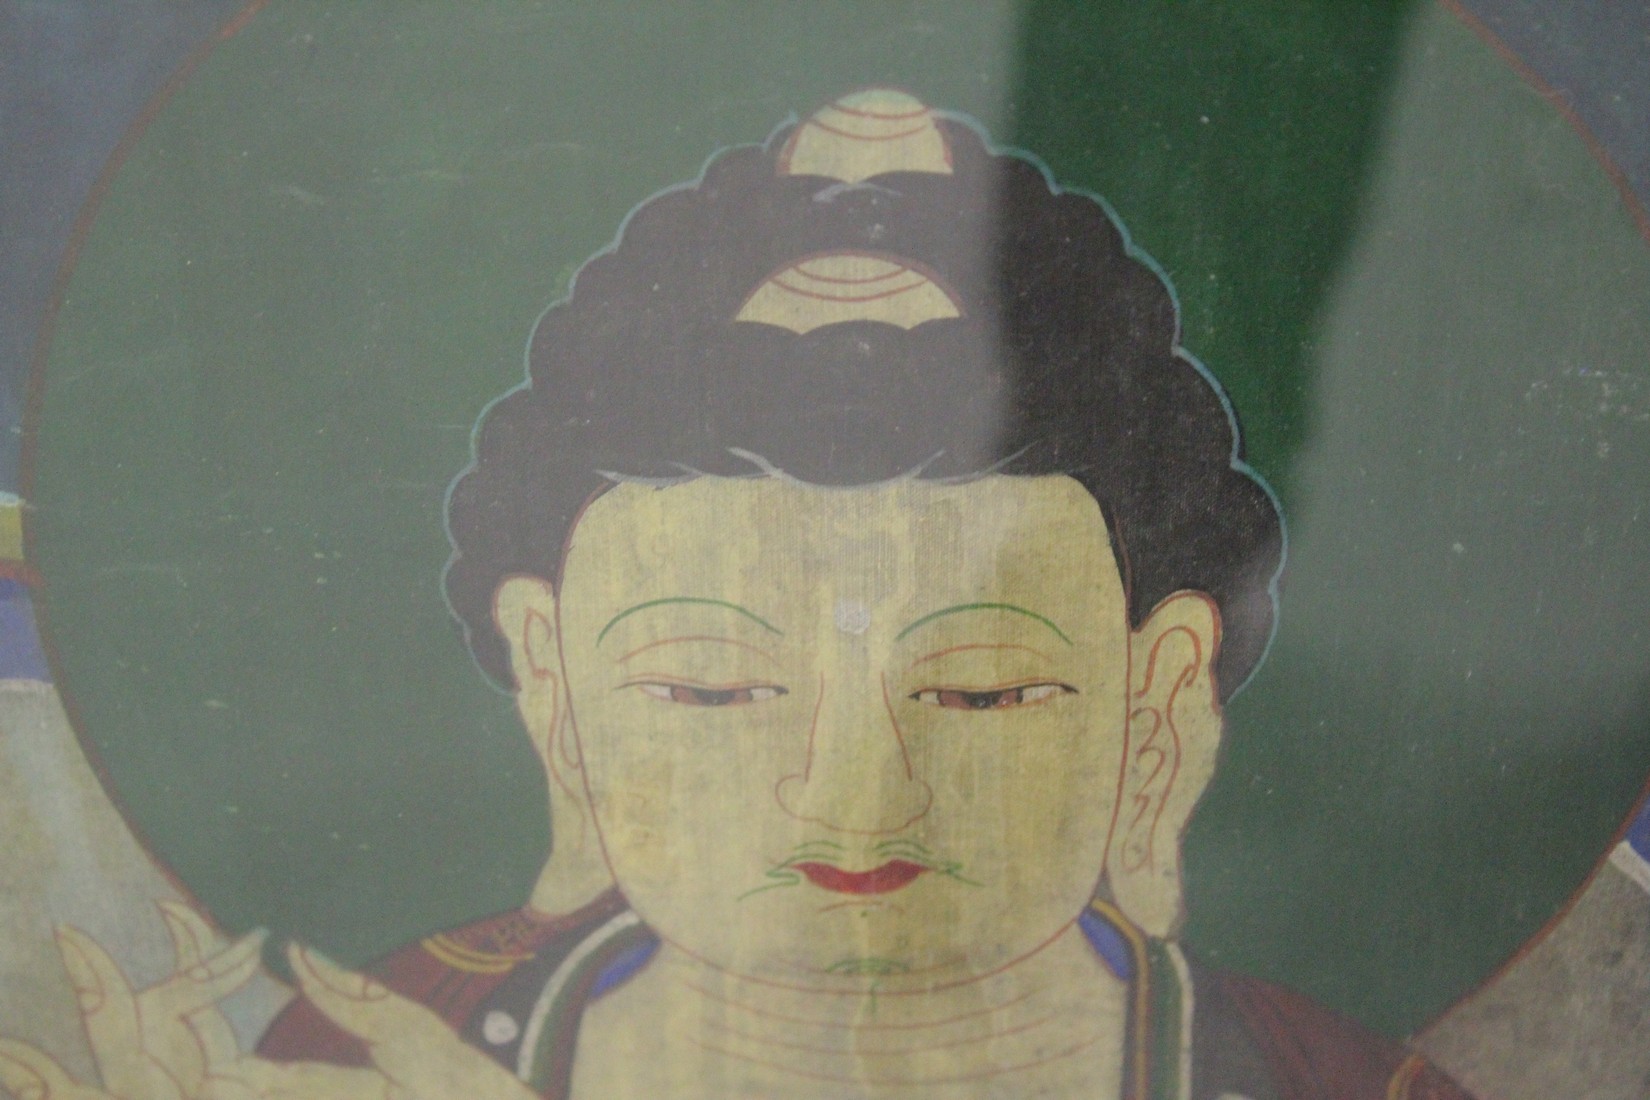 A FINE 19TH CENTURY PAINTING 'FIVE BUDDHAS', framed and glazed, image 71cm x 119.5cm. - Image 3 of 6